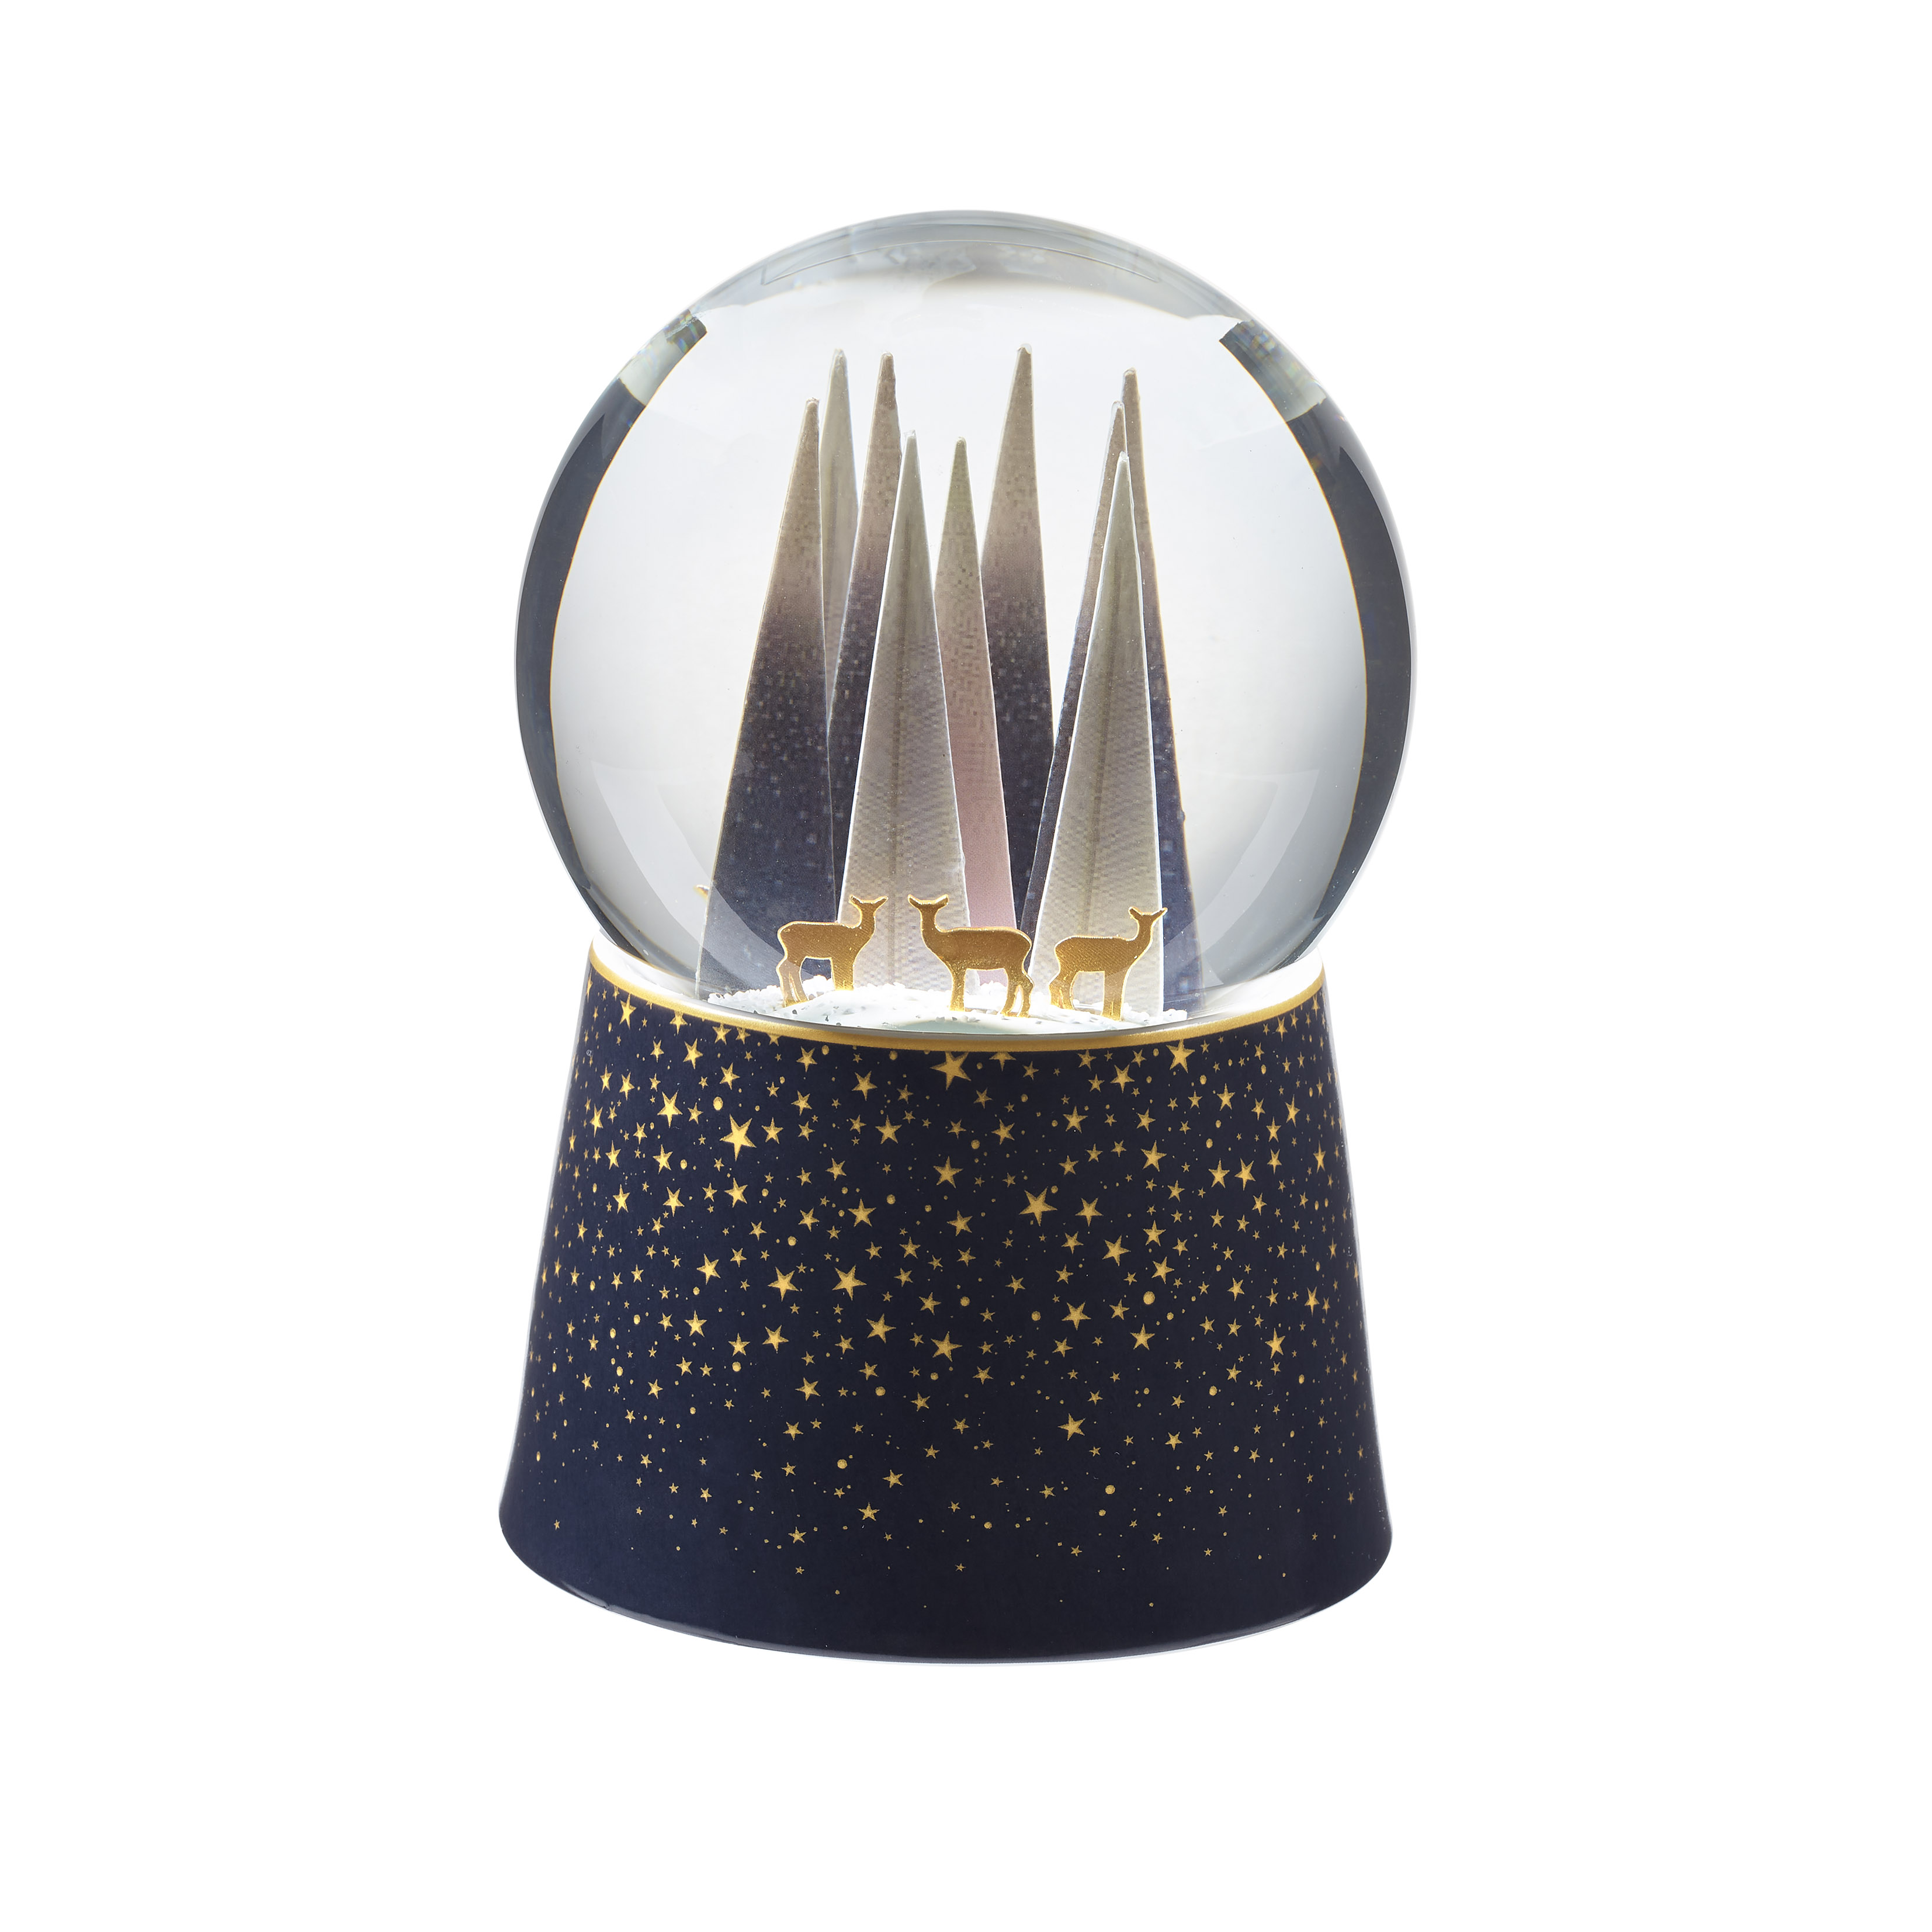 Sara Miller London for Portmeirion Frosted Pines Snowglobe (Oh Christmas Tree) image number null